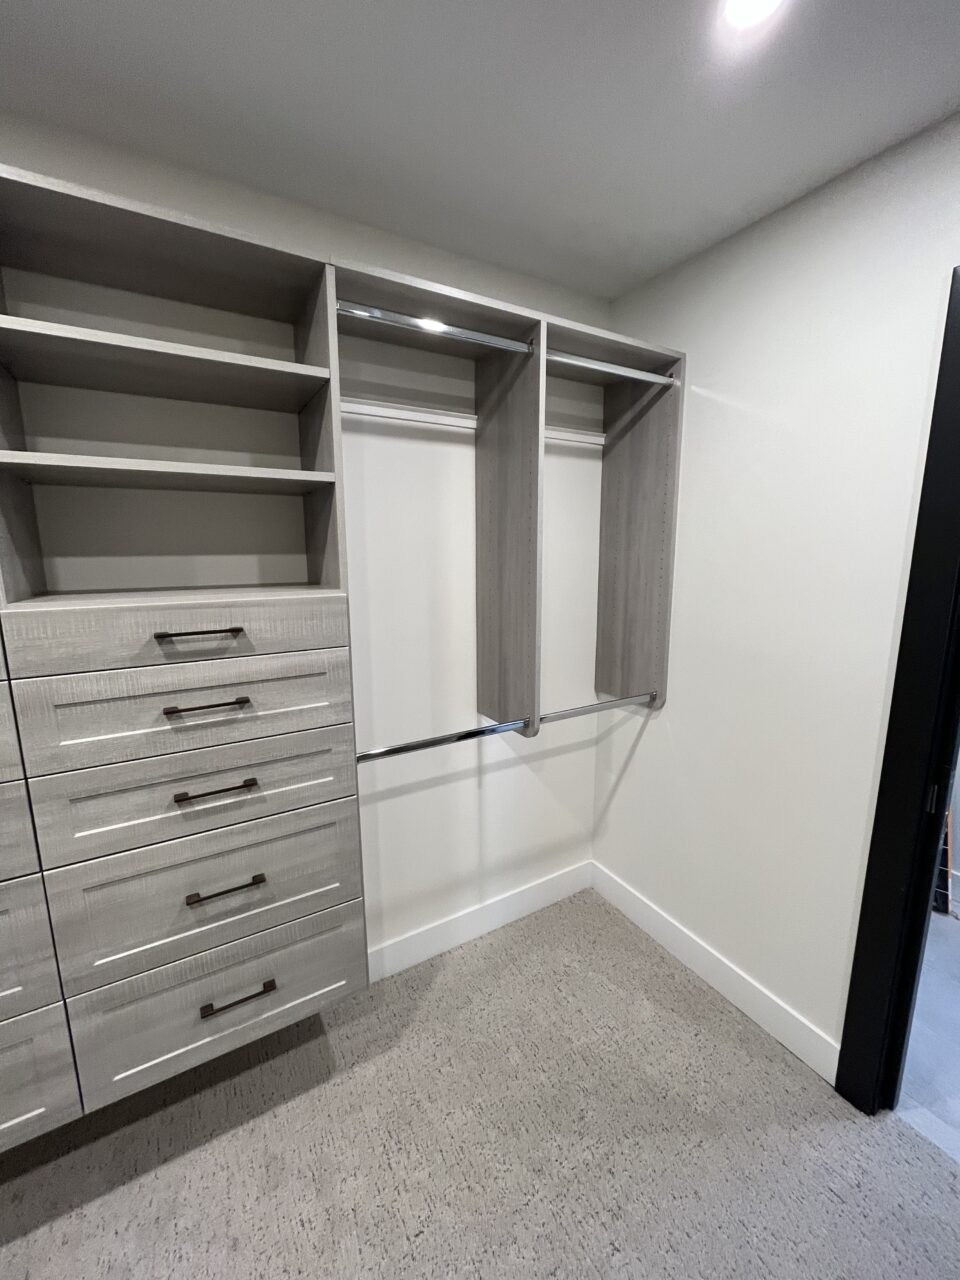 walk in closet with metal rods, shelves and drawers